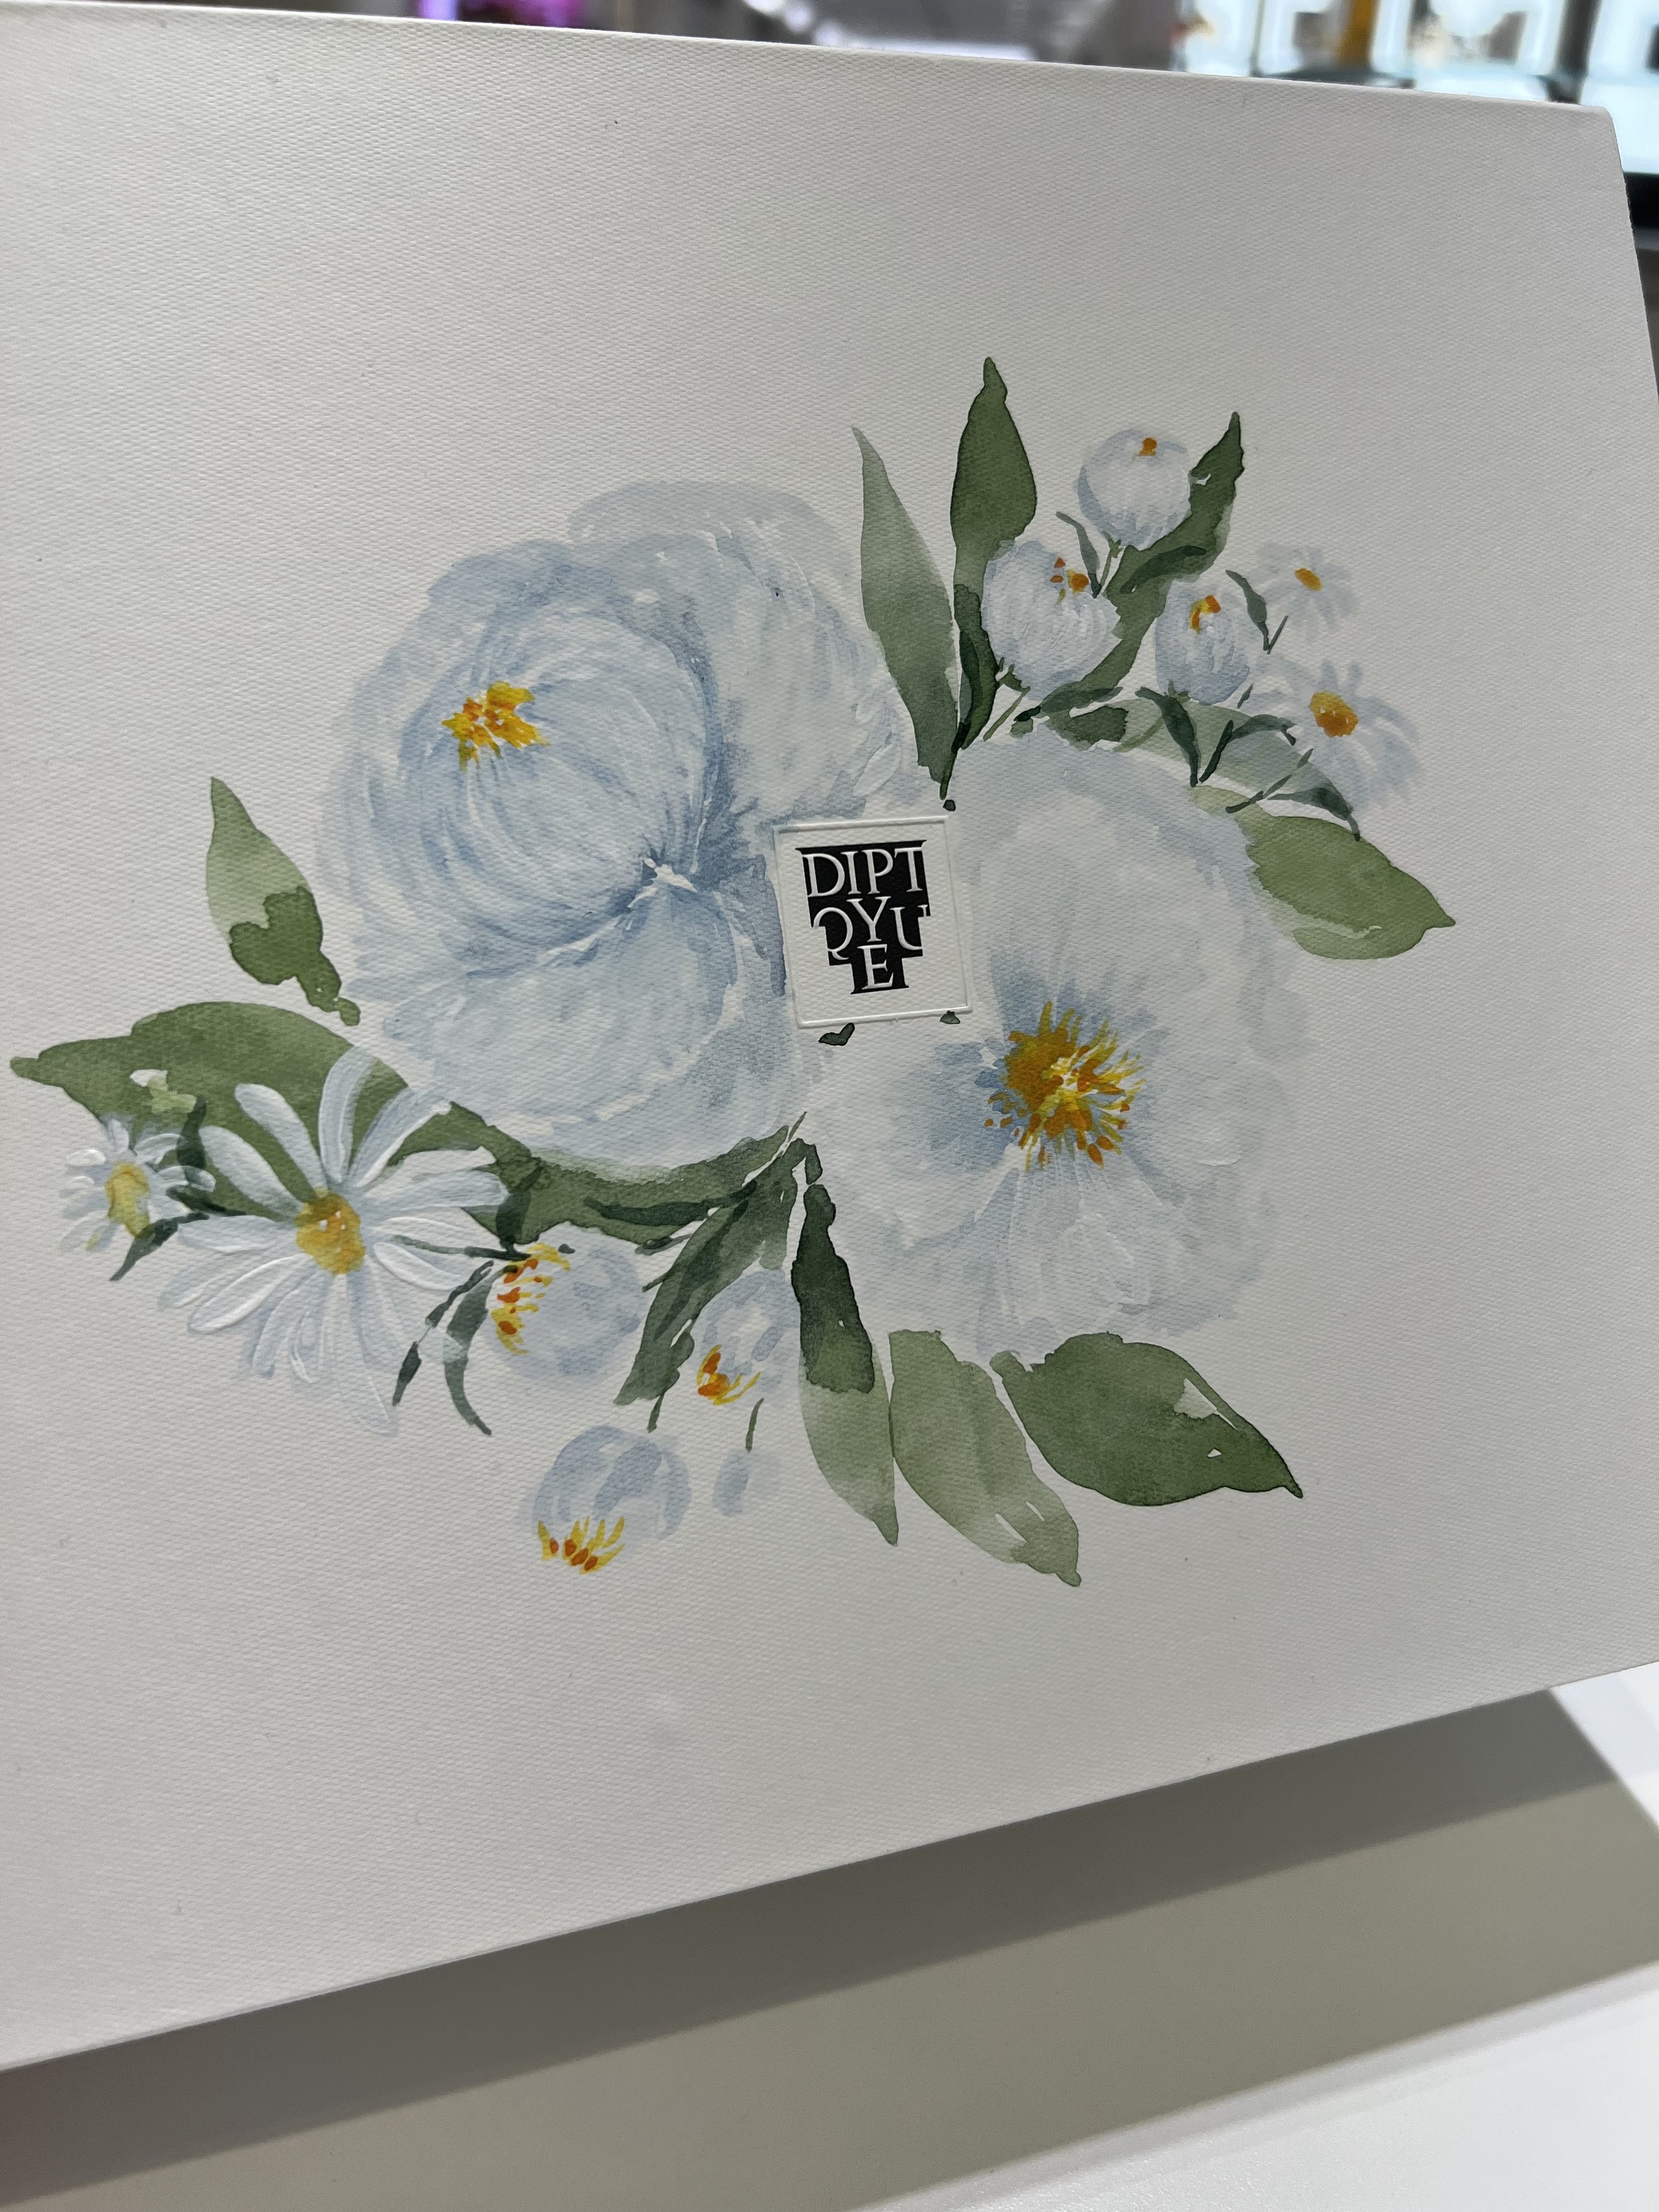 white-flowers-painted-on-diptyque-candle-boxes-montreal.jpeg